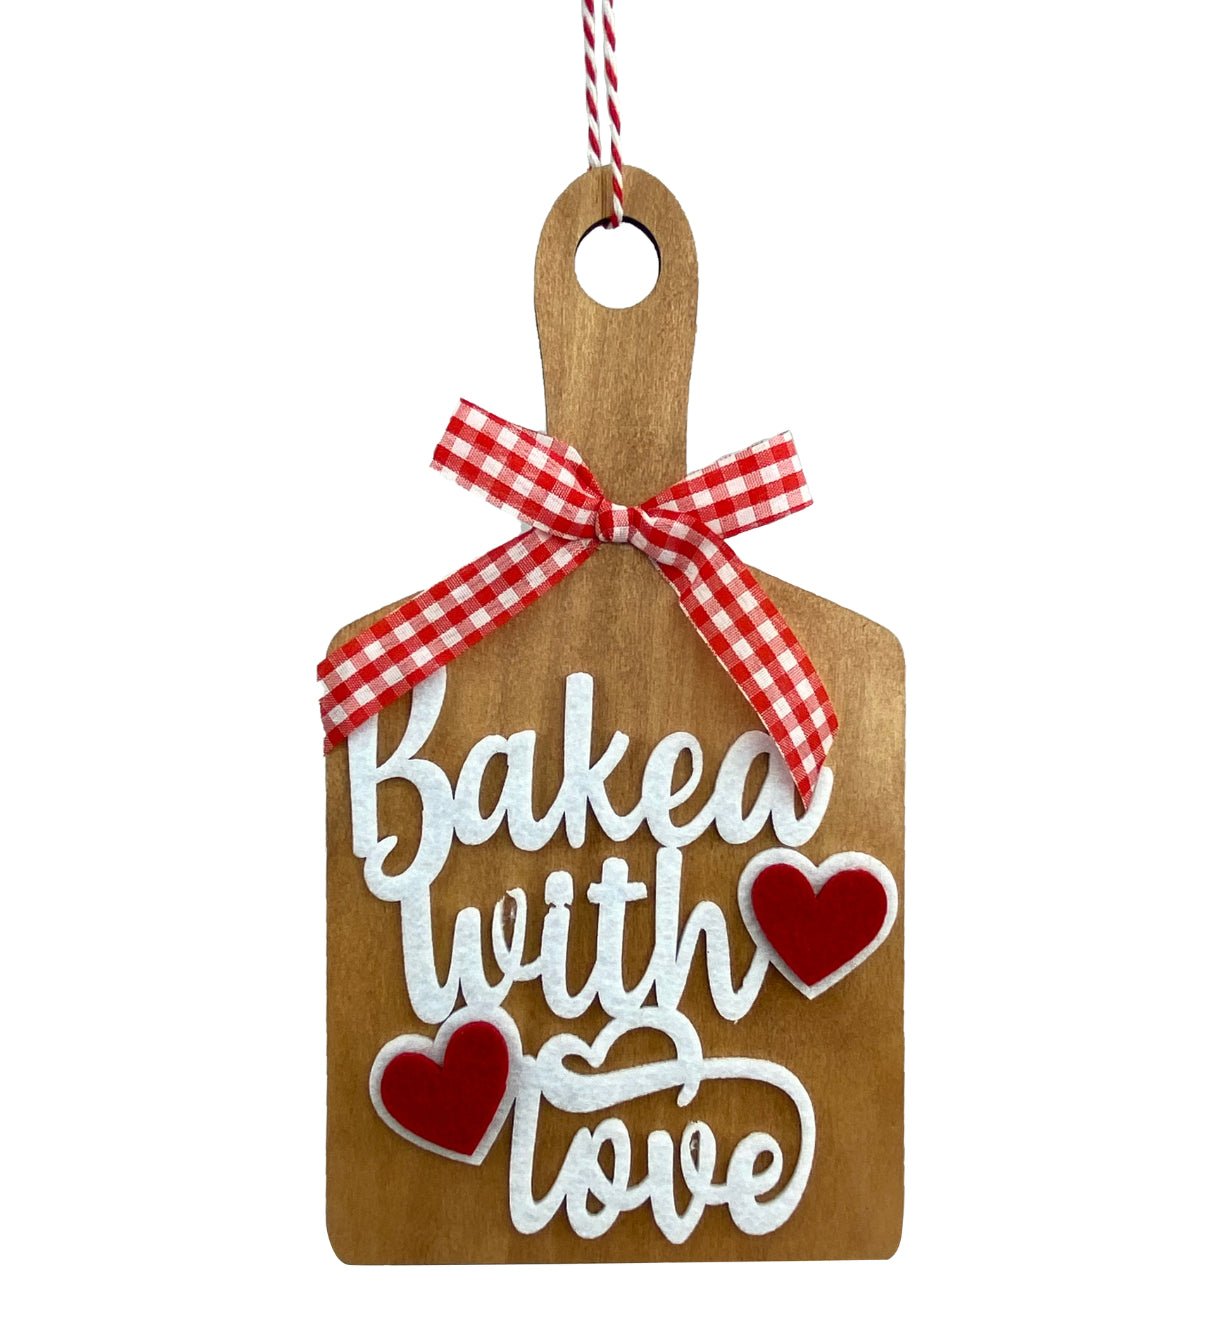 Baked with love cutting board sign - Greenery MarketPicks85600RDWT